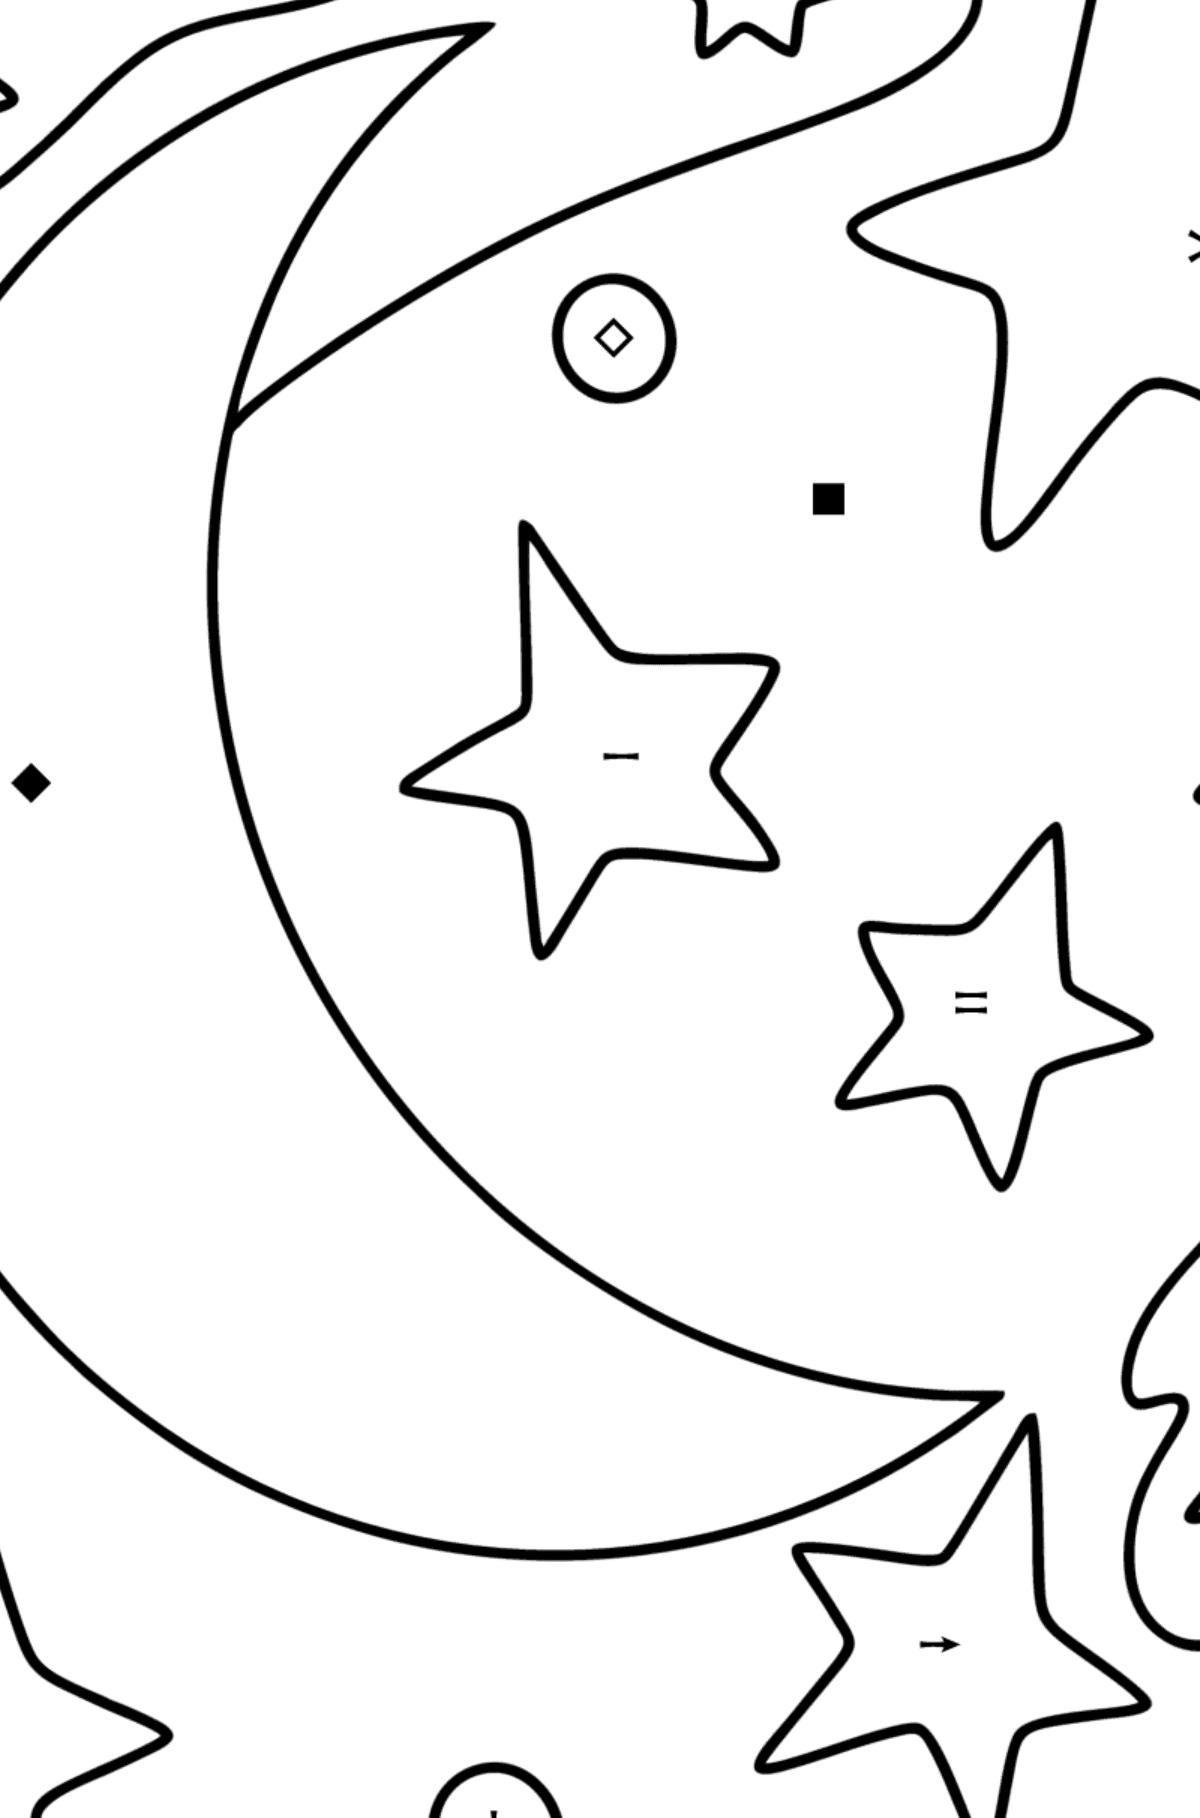 Coloring page moon and stars - Coloring by Symbols for Kids